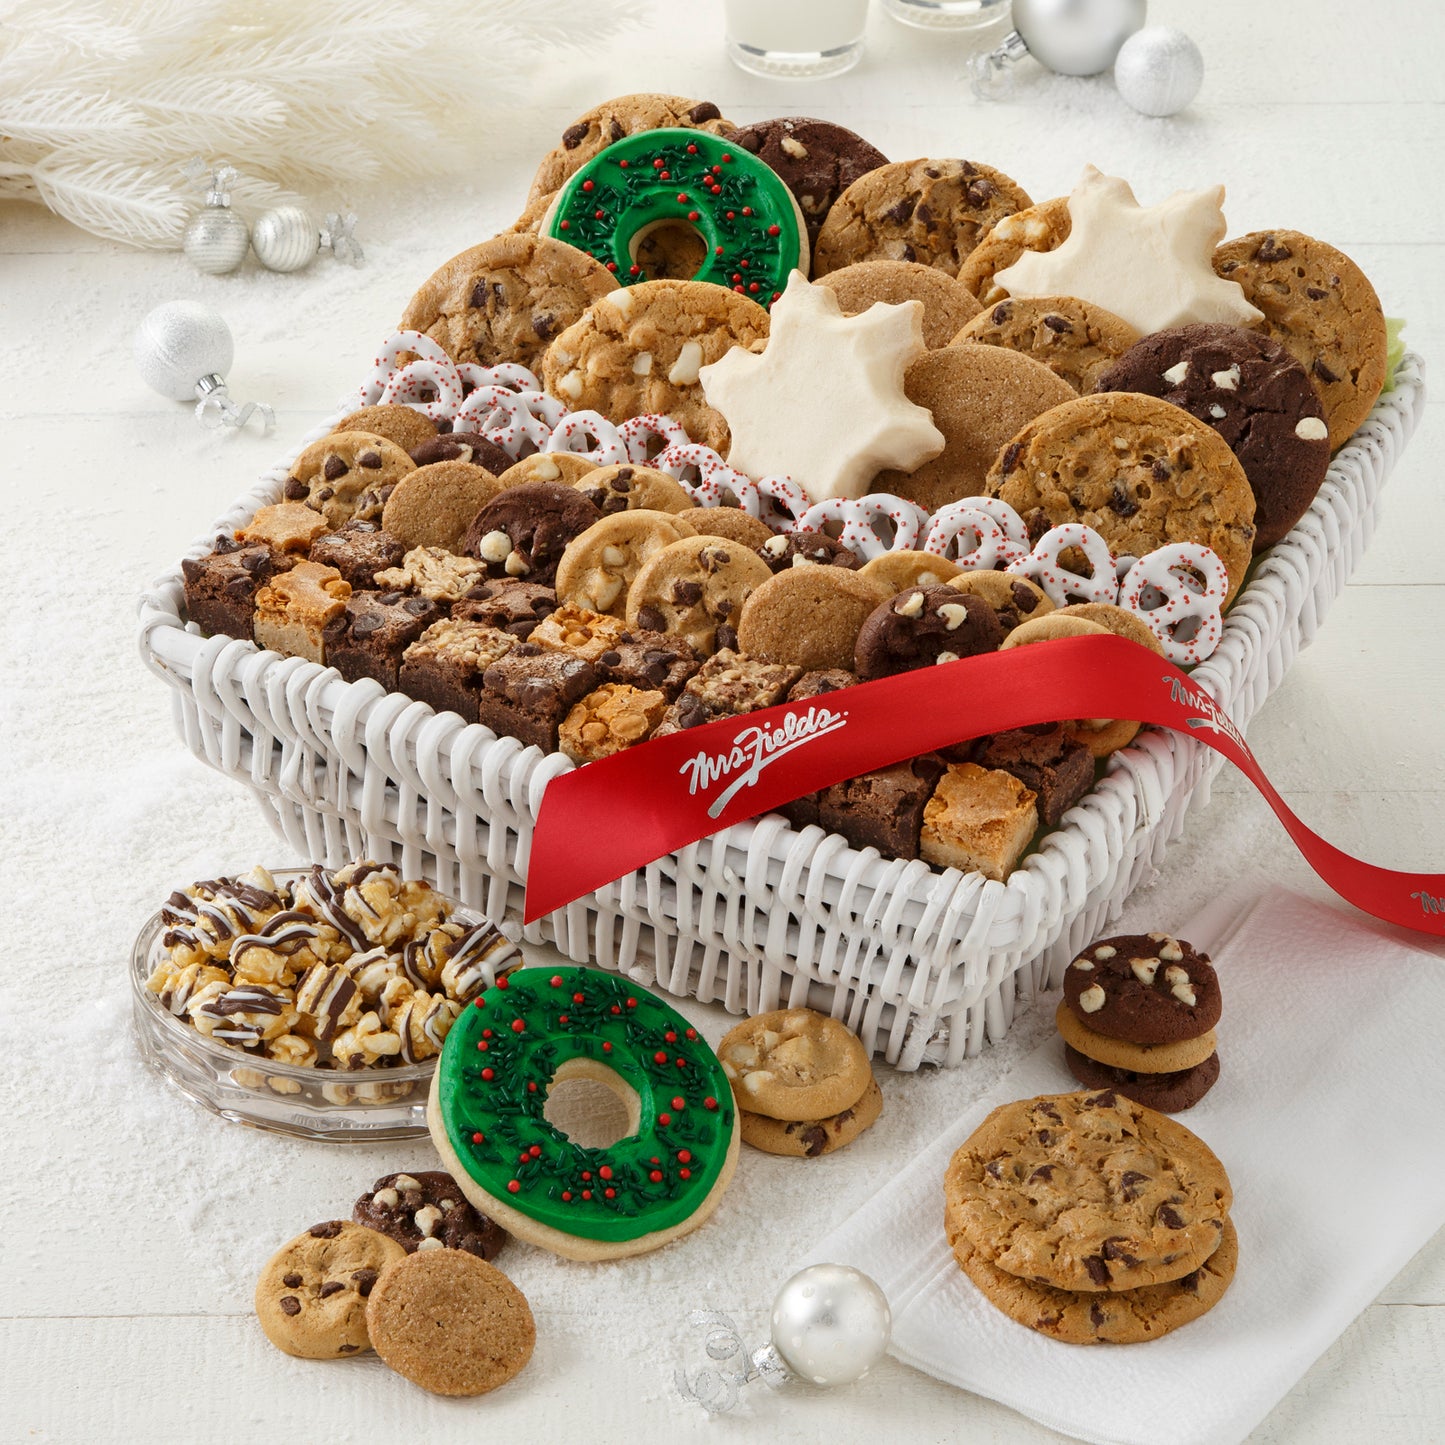 A white basket filled with an assortment of original cookies, Nibblers®, brownie bites, yogurt-covered pretzels, two frosted snowflake cookies, two frosted wreath cookies with sprinkles, and chocolate drizzled popcorn and decorated with a red Mrs. Fields' ribbon.